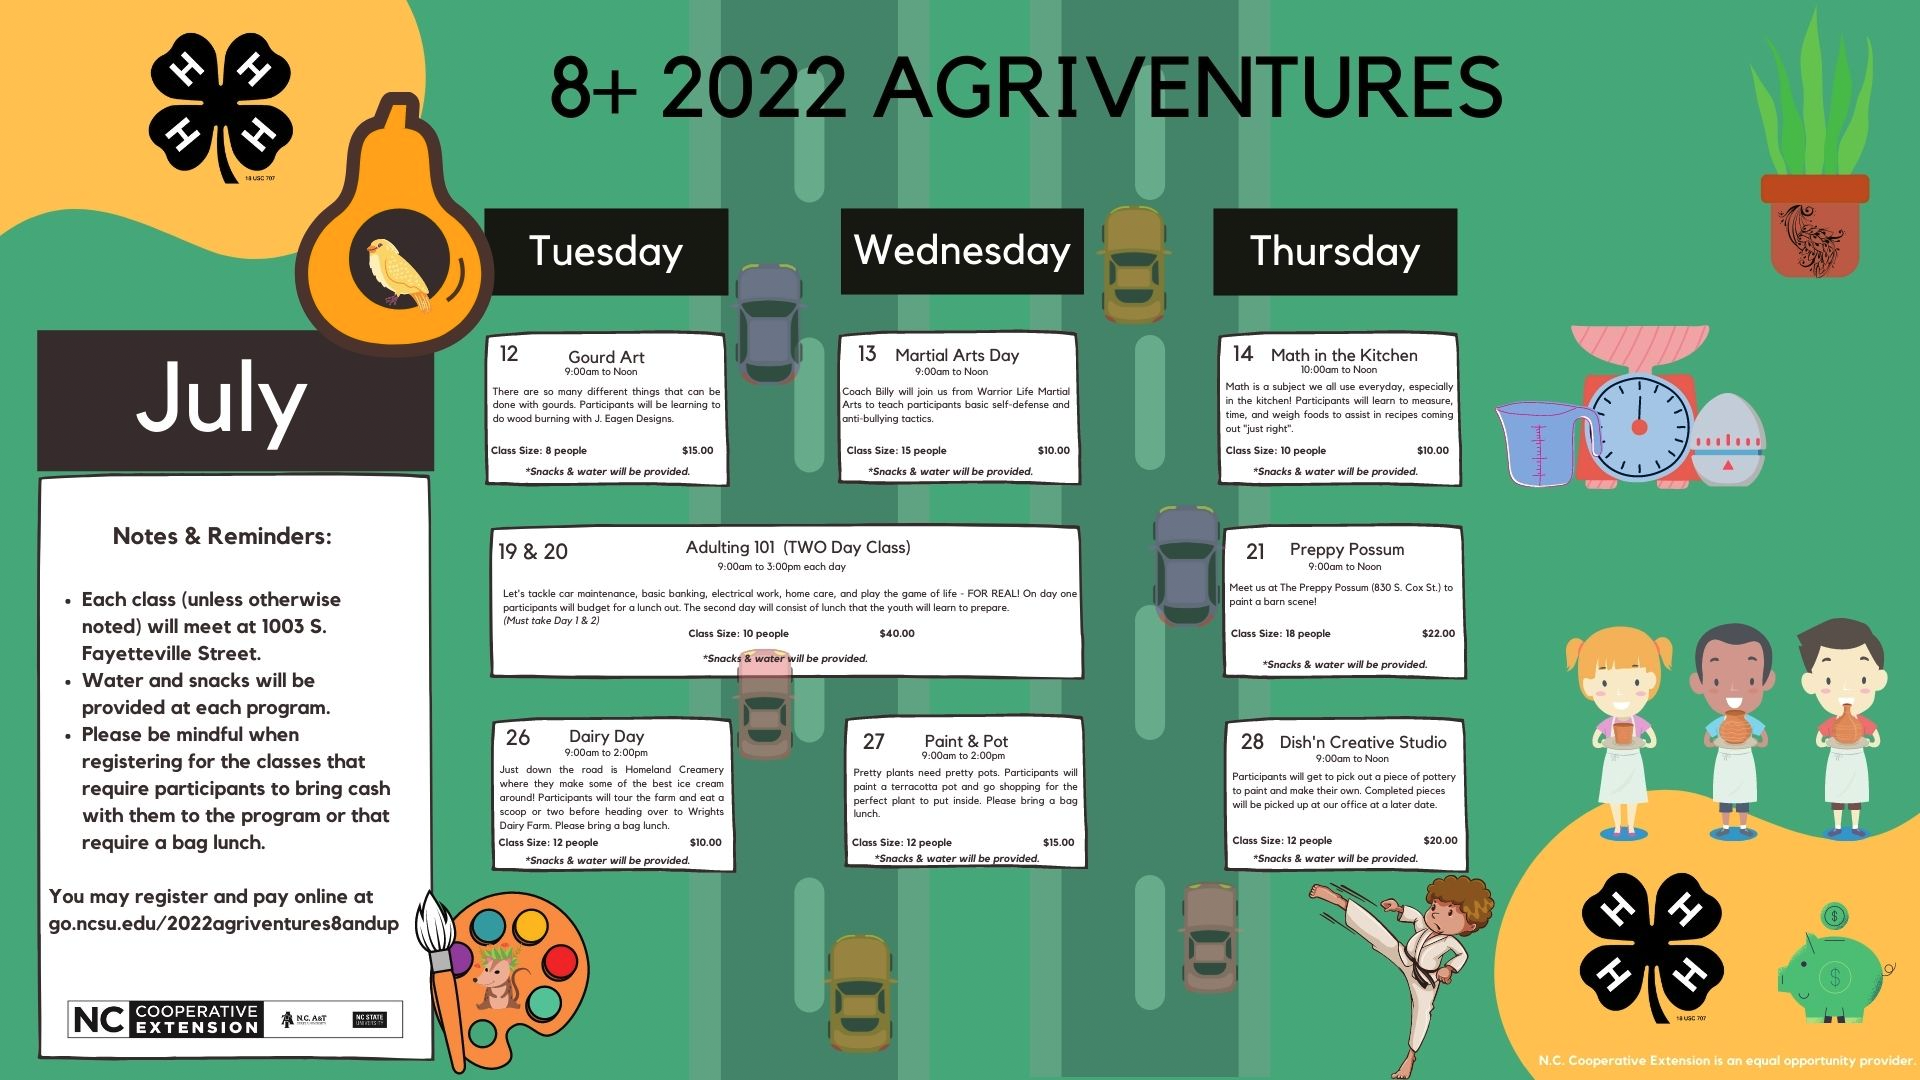 July 2022 Agriventures class calendar for 8+ year olds